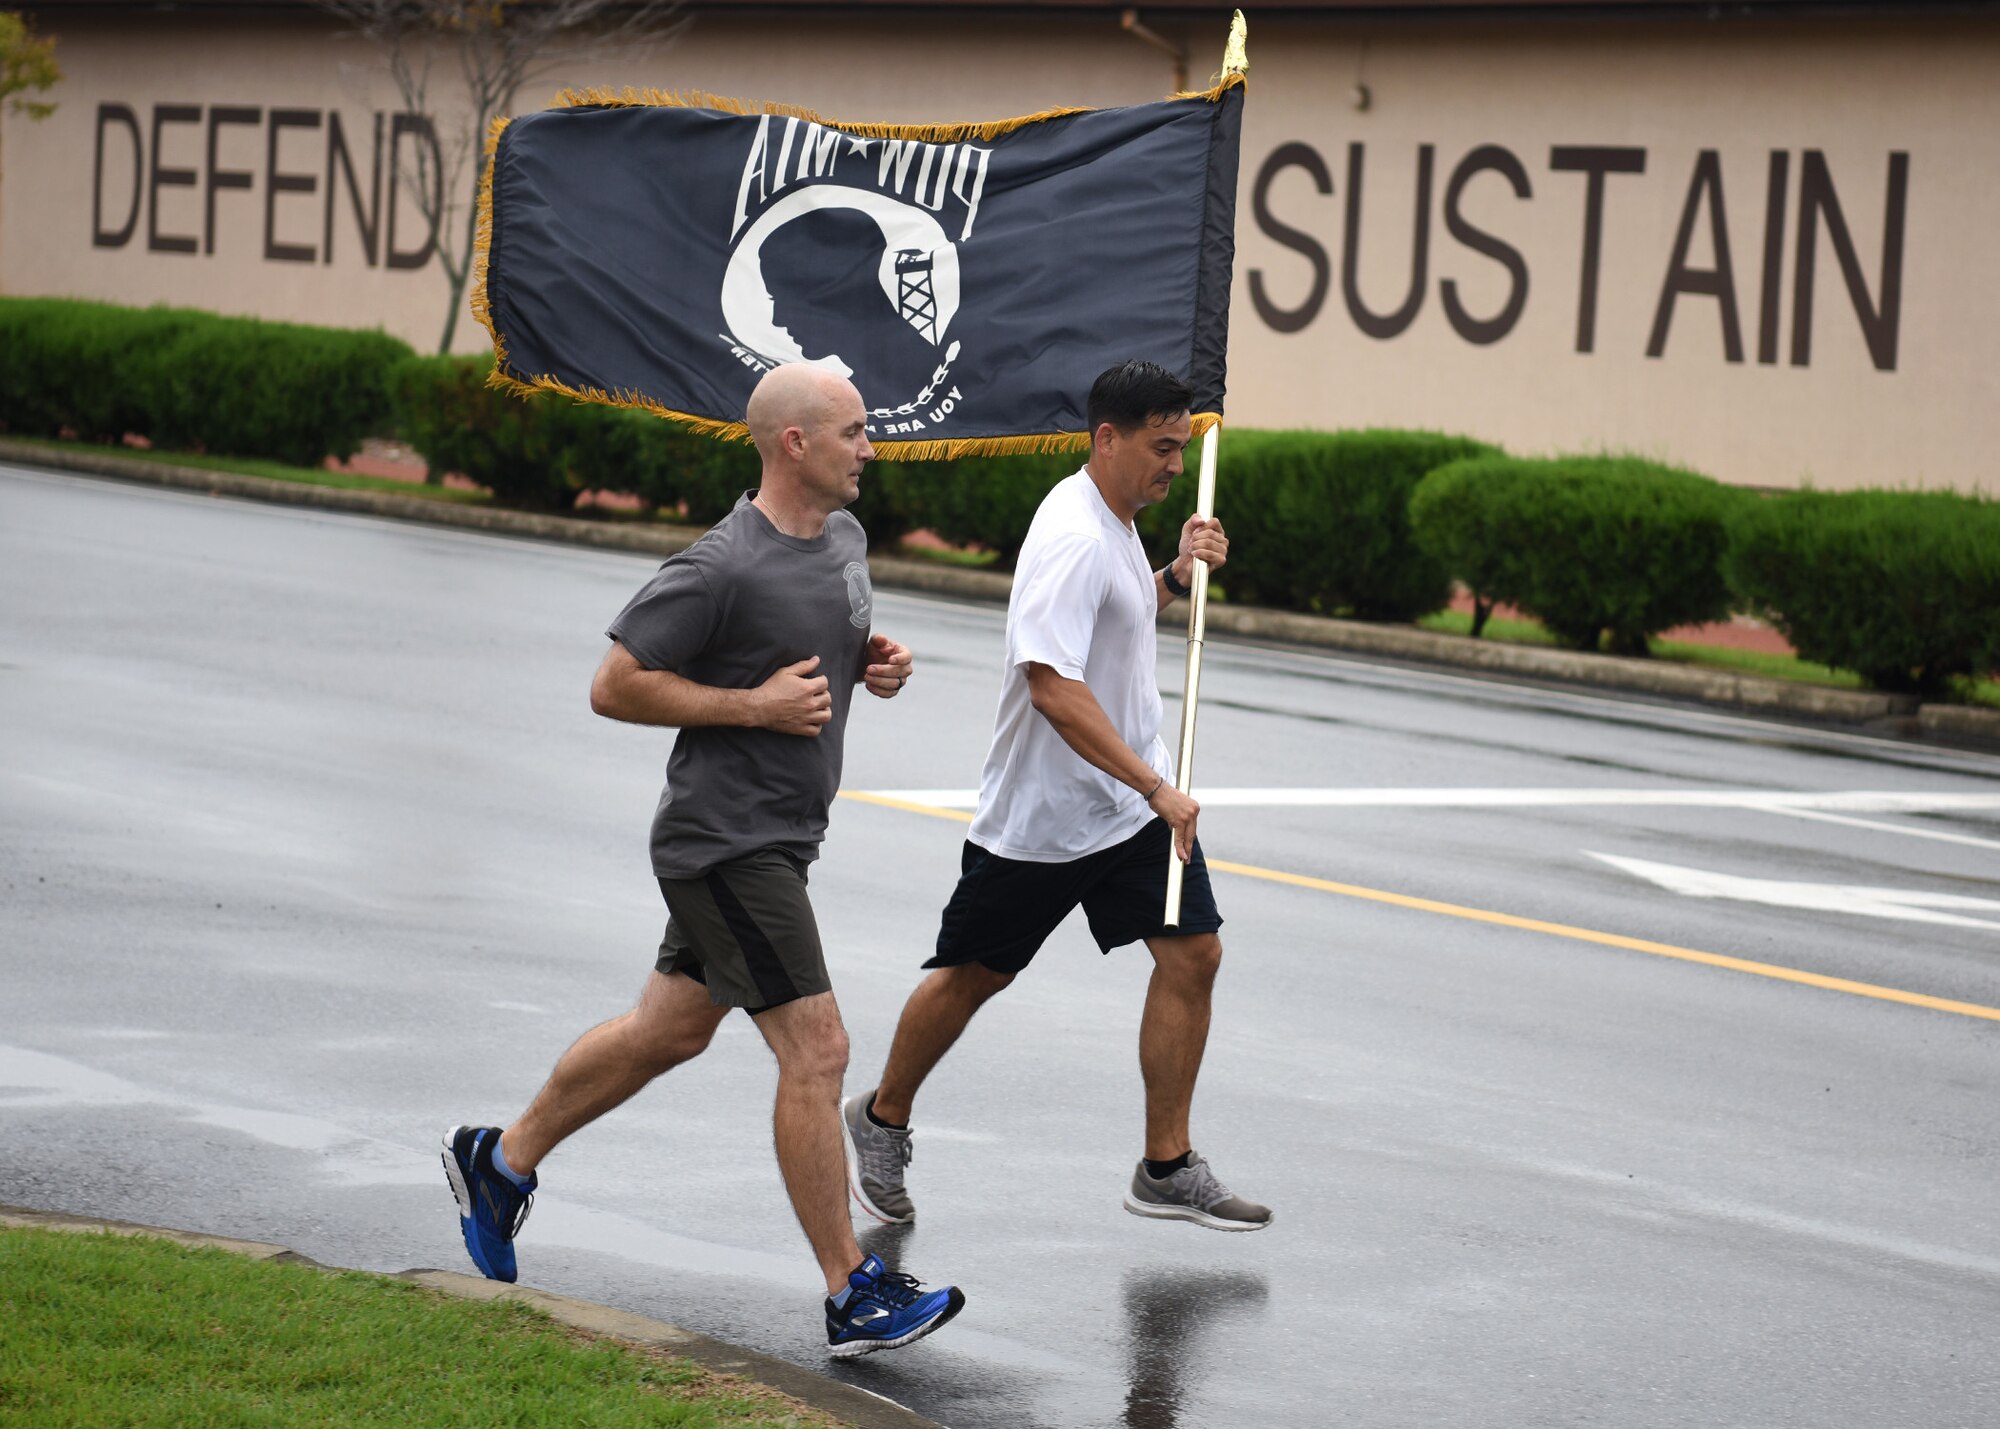 U.S. Air Force Tech. Sgt. Kurt Kanzler, a precision guidance munitions production supervisor with the 51st Munitions Squadron, runs with a prisoner of war and missing in action flag during a 24-hour vigil run at Osan Air Base, Republic of Korea, Sept. 21, 2018. The main purpose of POW/MIA Remembrance Day is to pay tribute and honor the sacrifices of prisoners of war and those who are missing in action. (U.S. Air Force photo by Staff Sgt. Sergio A. Gamboa)